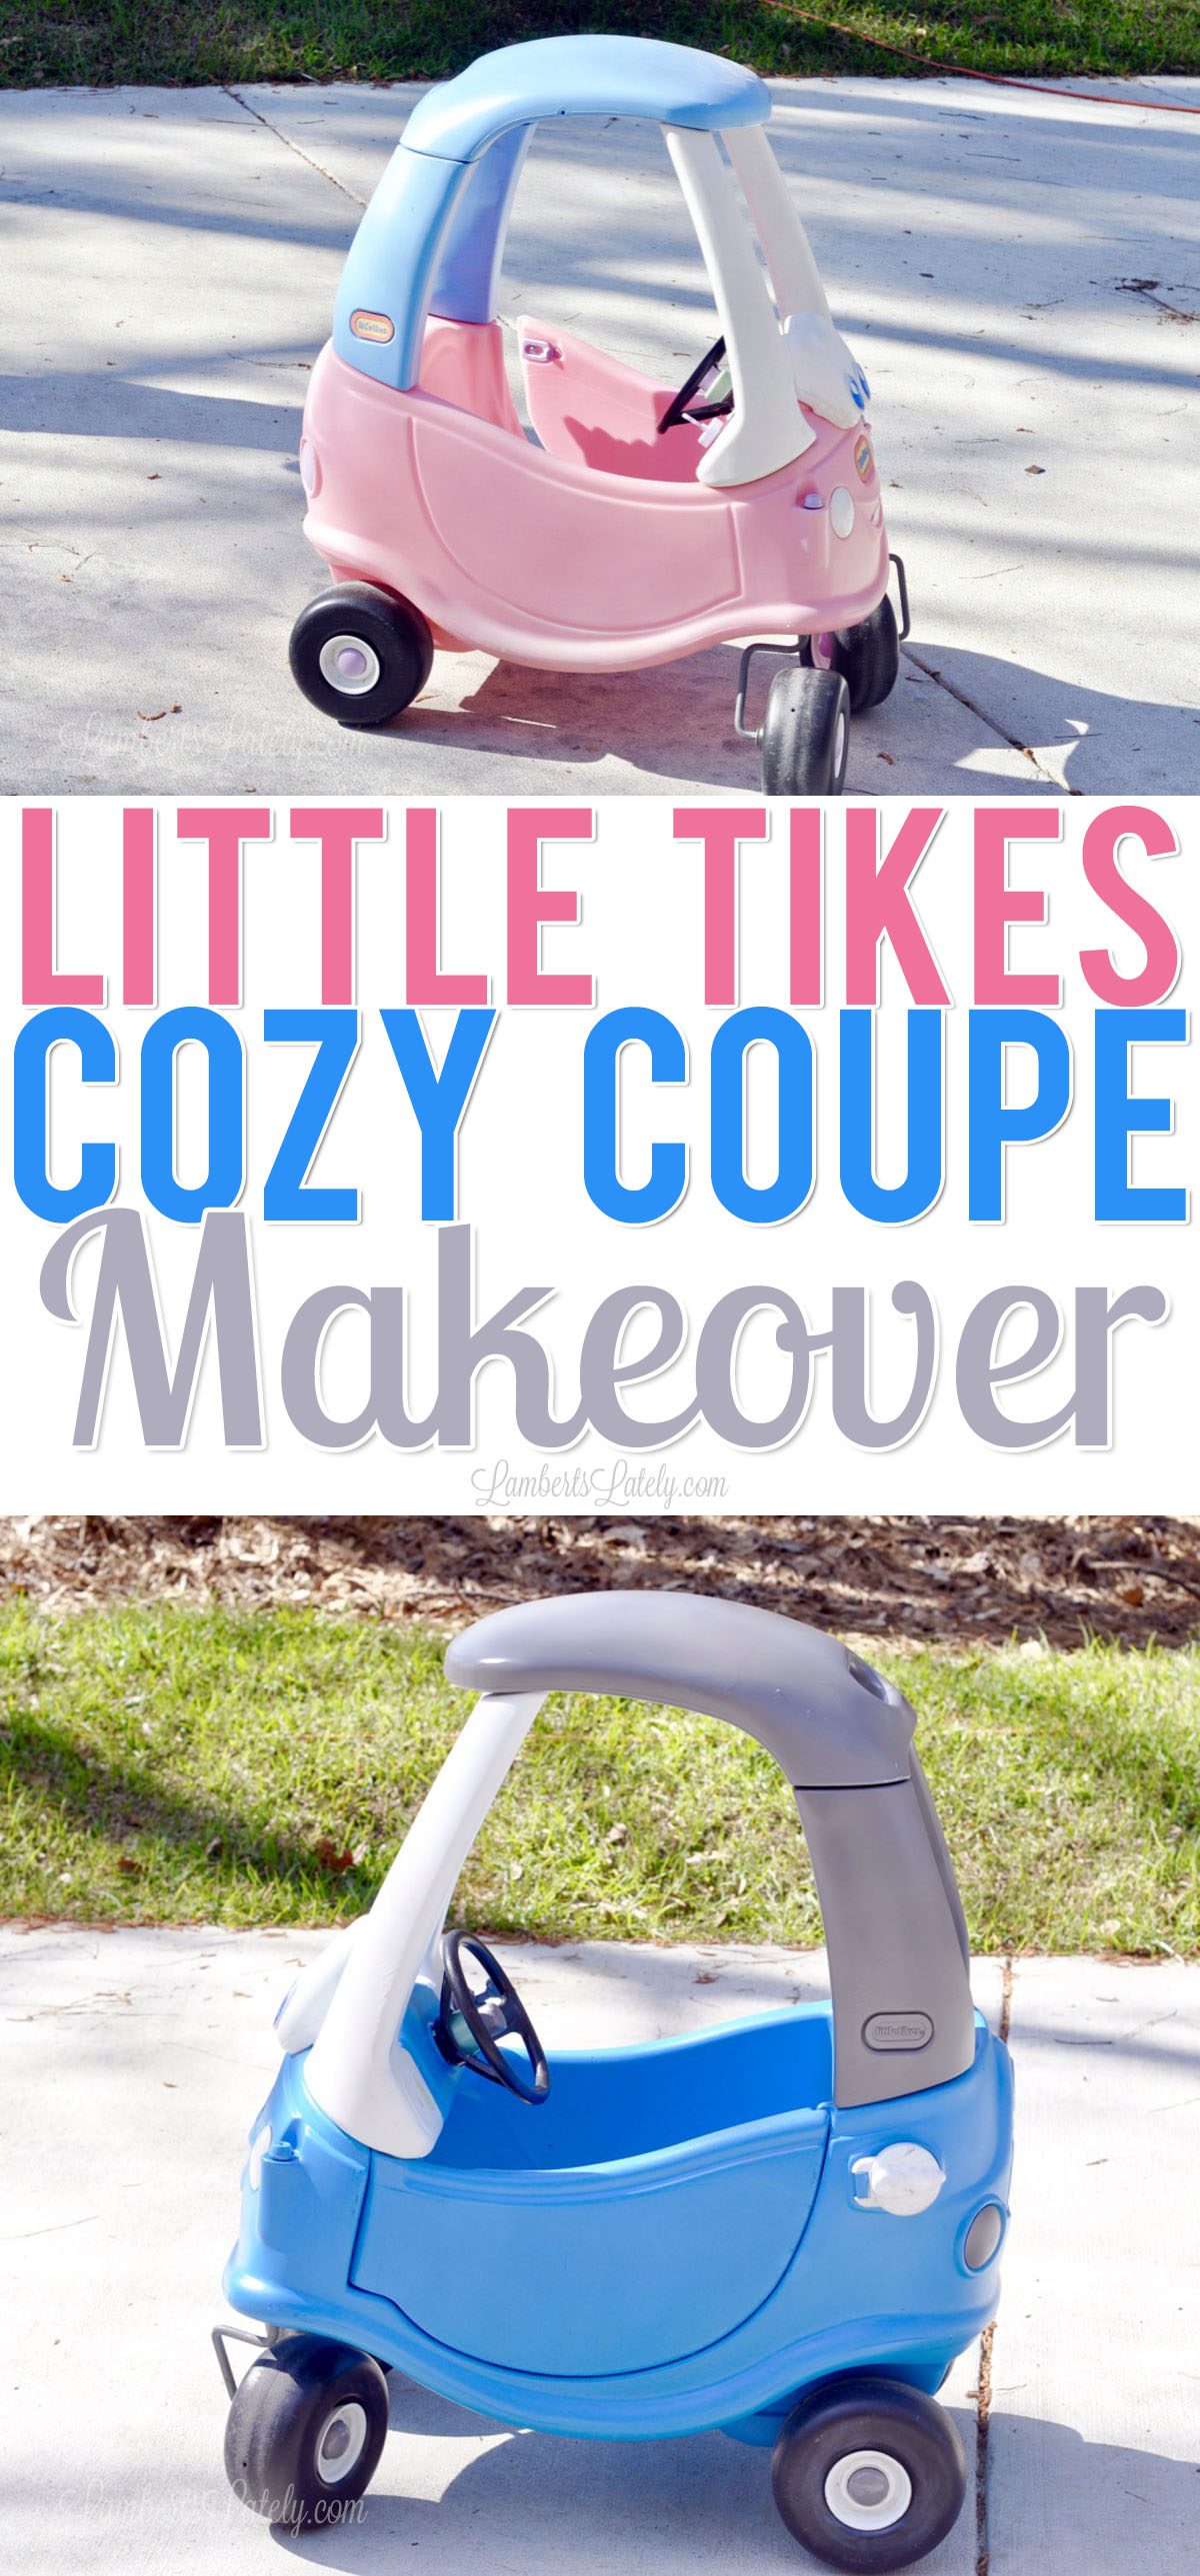 This is an awesome tutorial for how you can give a Little Tikes Cozy Coupe car a DIY makeover (for boys or girls) with simple cleaning and spray paint! Great project to do with kids.